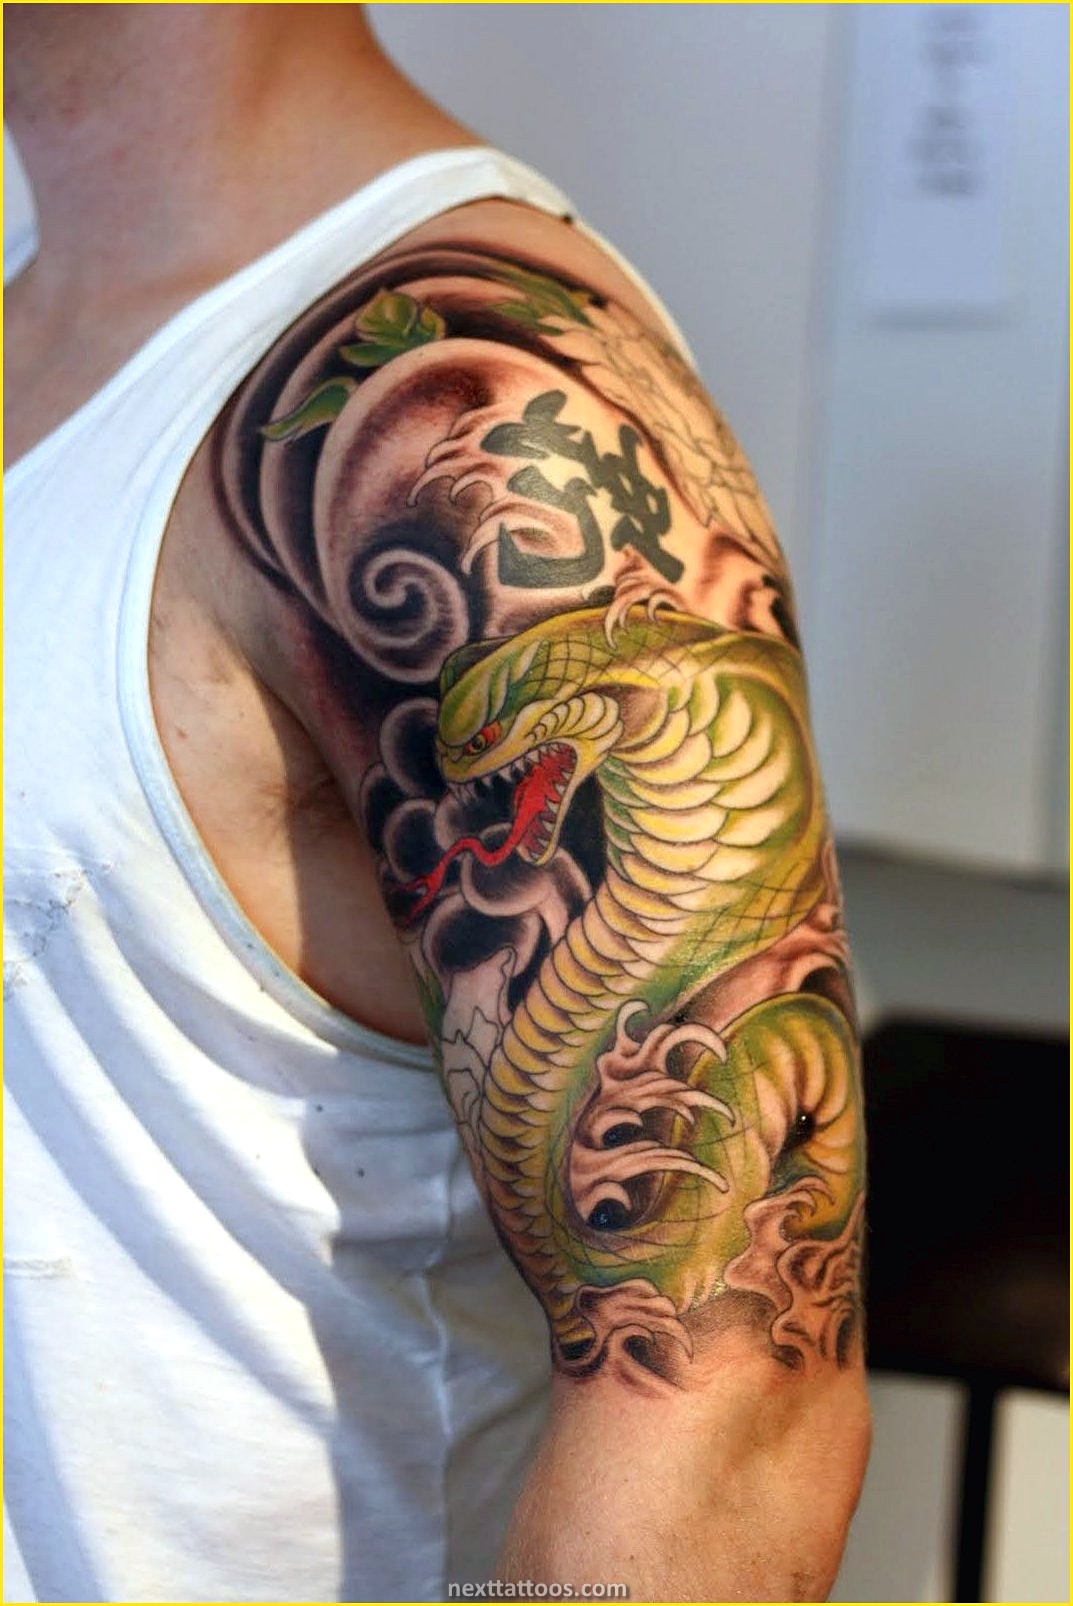 Cool Arm Tattoos For Girls and Cool Arm Tattoos For Guys